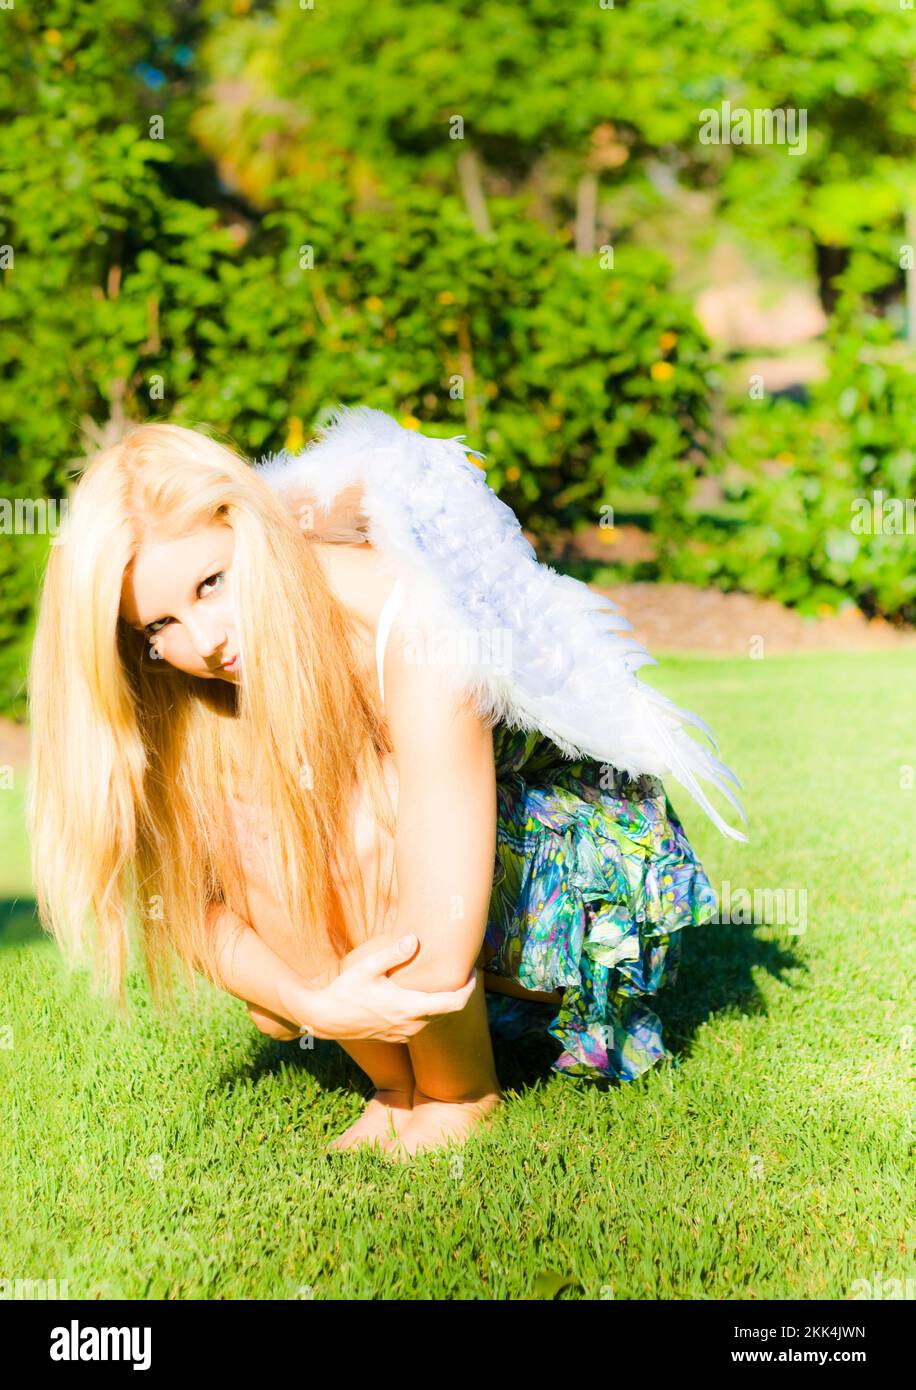 Woman with long blonde hair squatting arms around her knees, with feather wings on her back in a broken wings concept Stock Photo